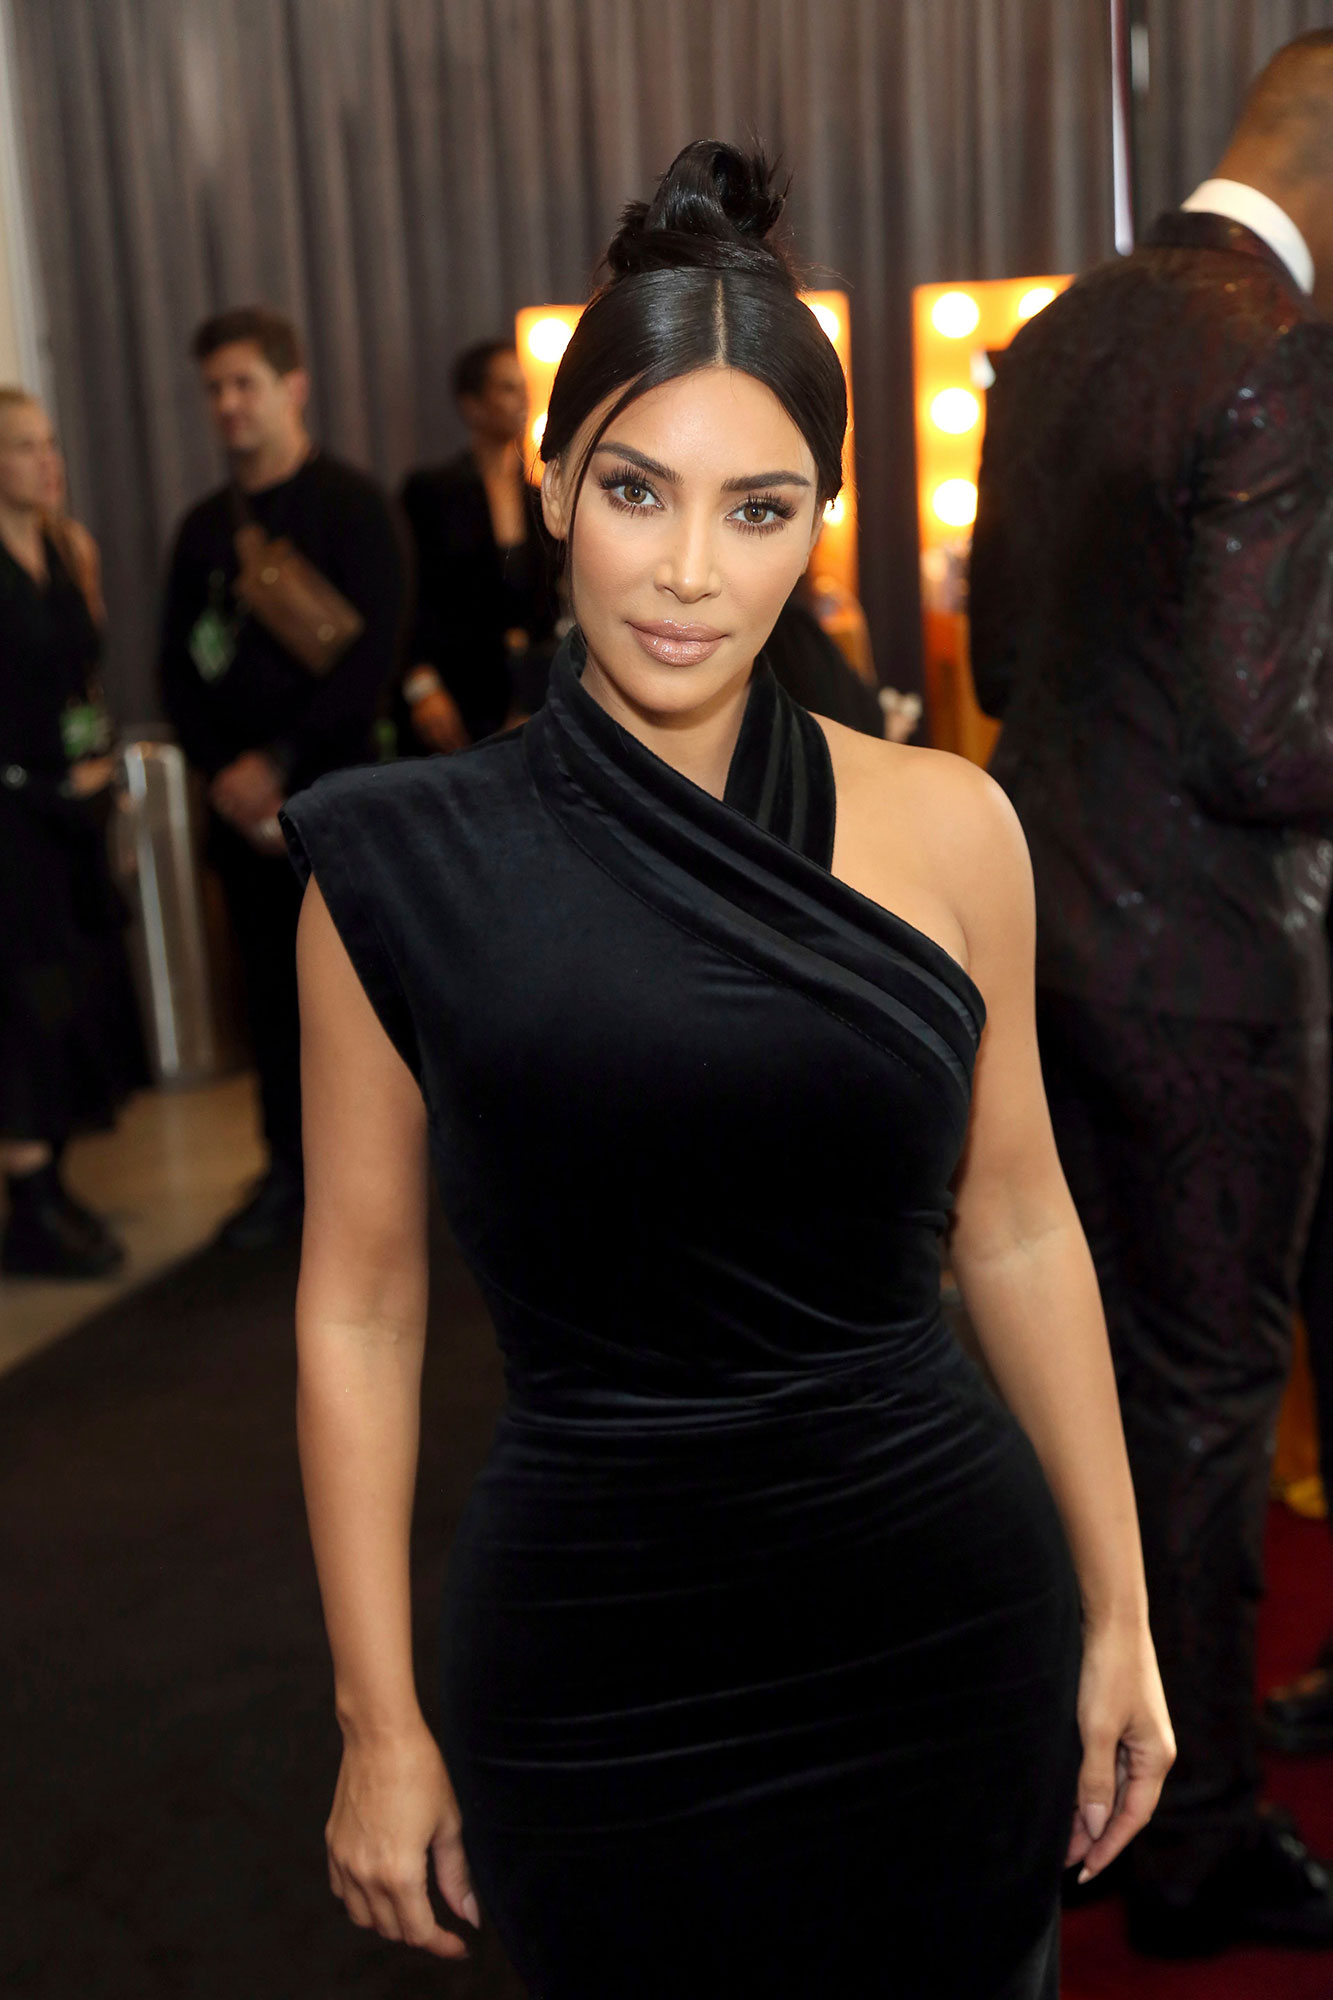 Kim Kardashian’s Dermatologist Says She Could Be a Doctor’s Consultant: ‘We Have a Similar Understanding of Aesthetics